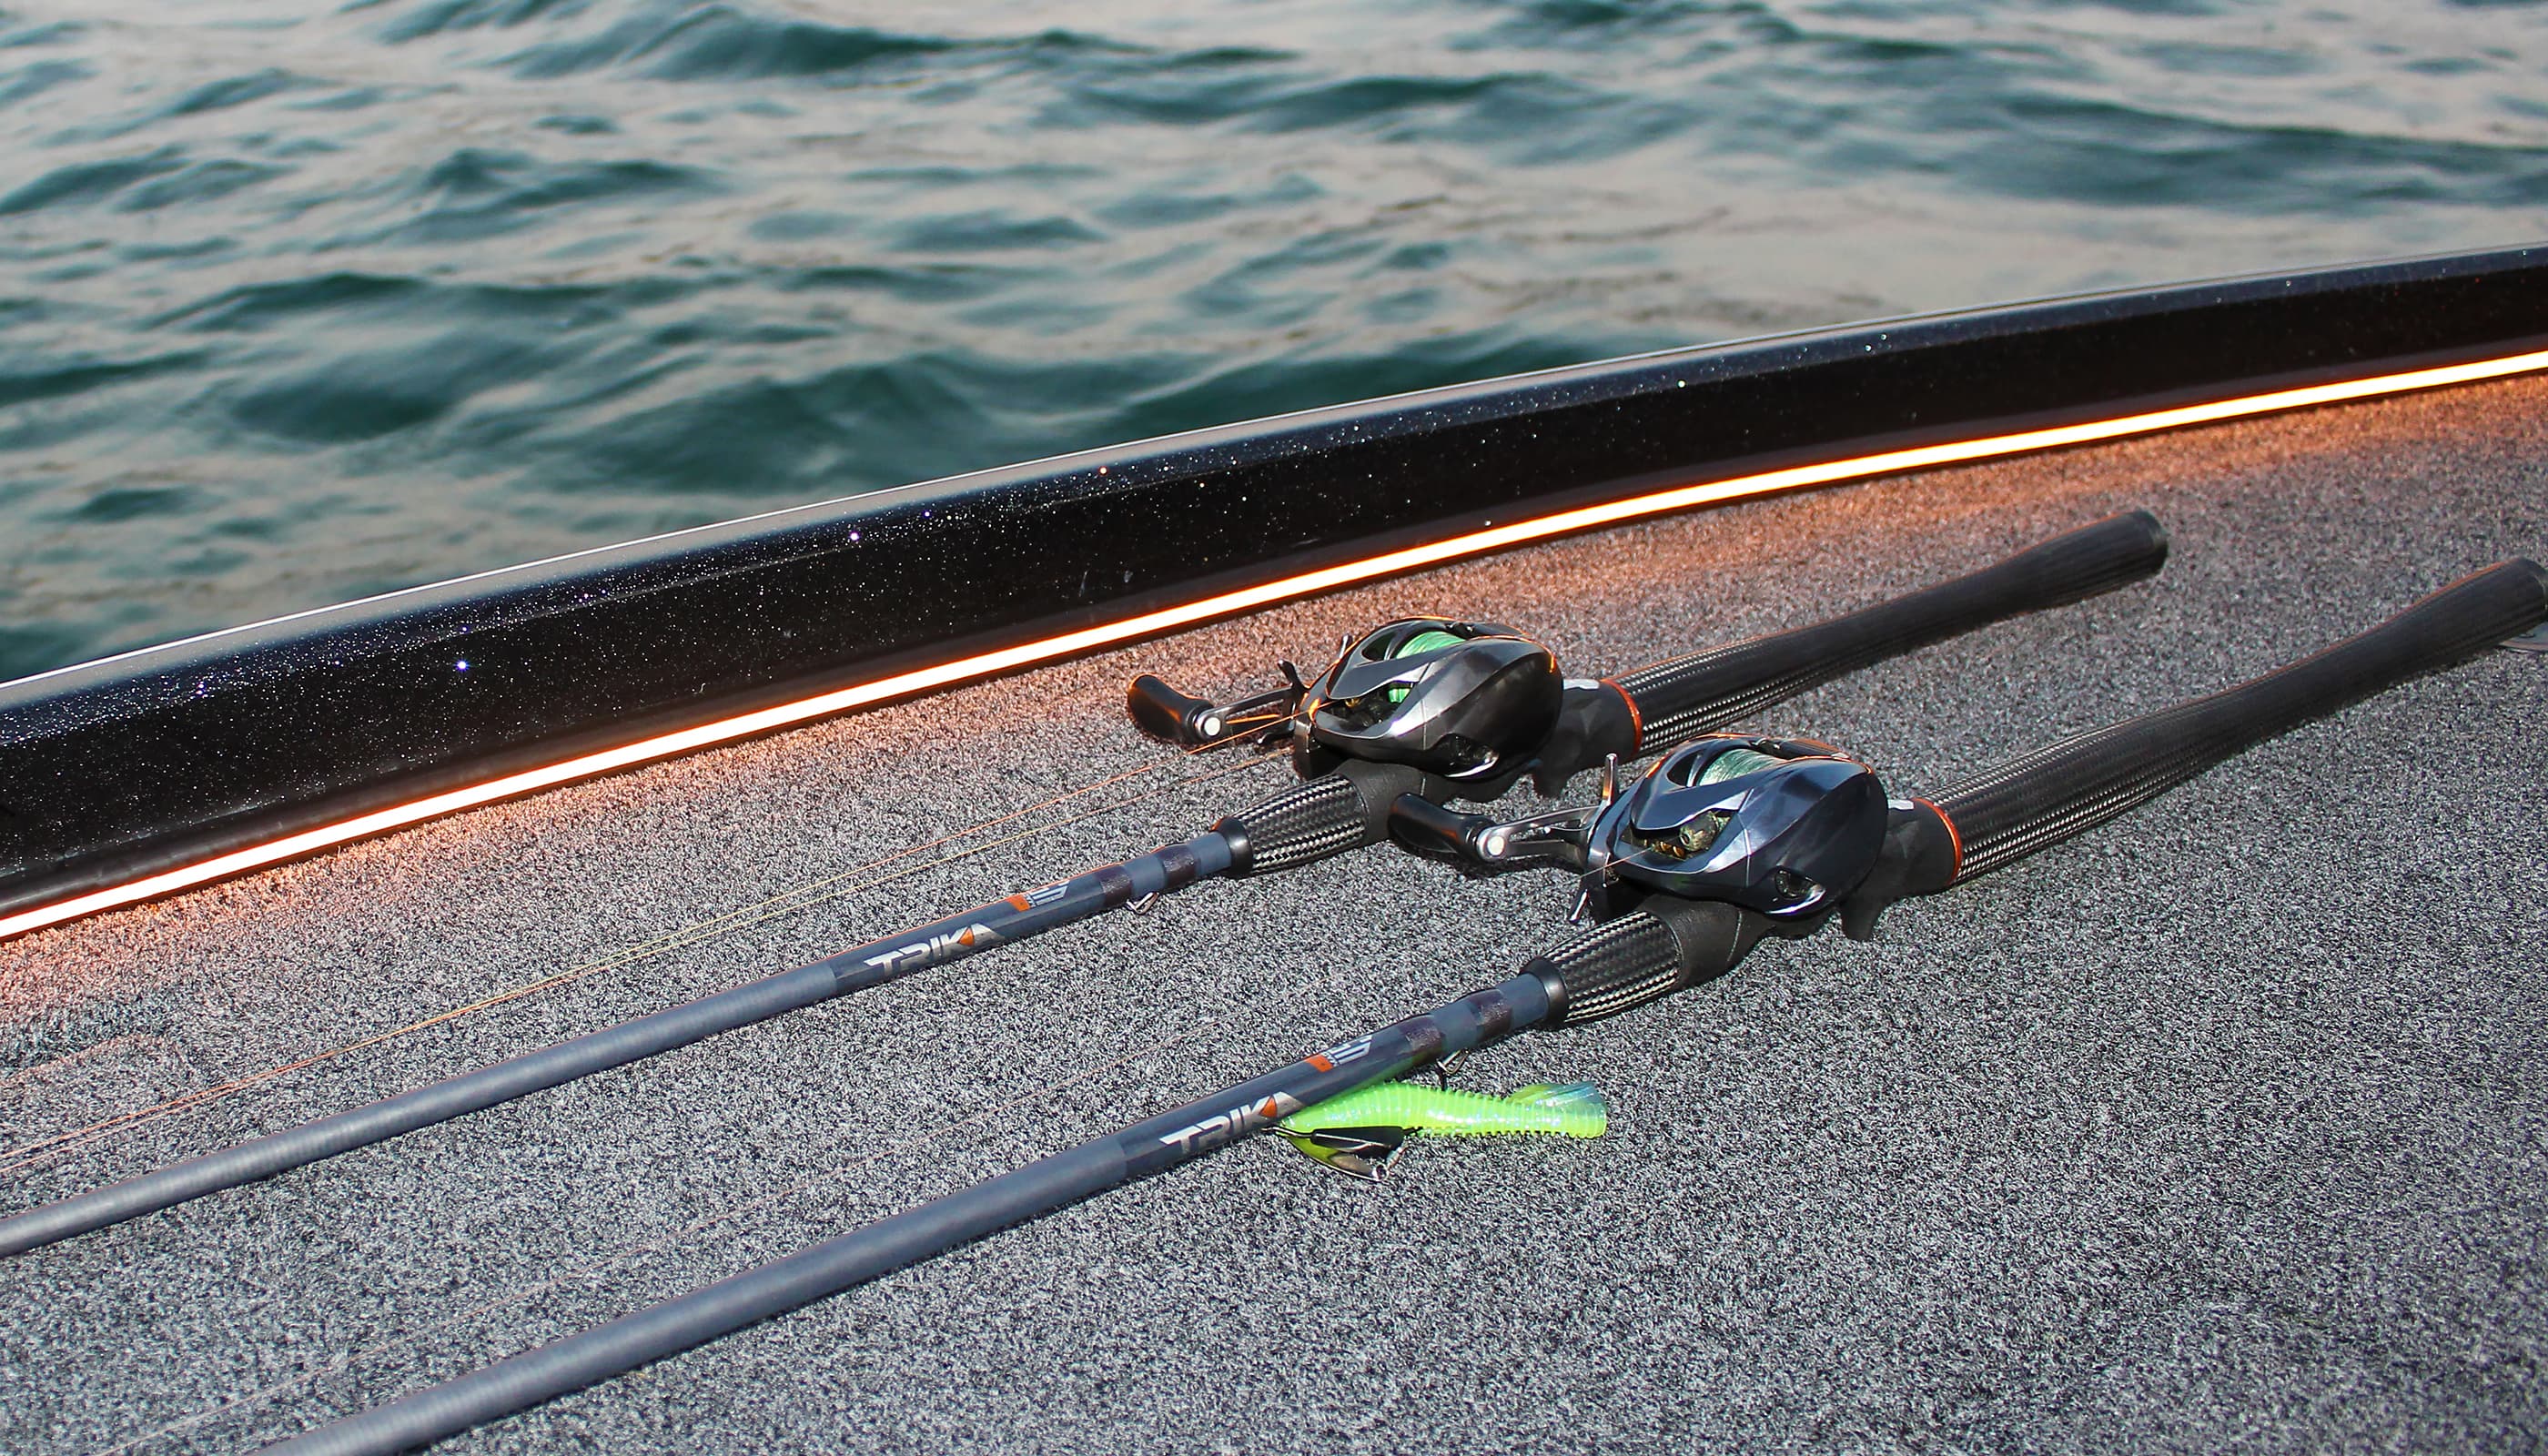 PERFORMANCE RODS - For Every Angler